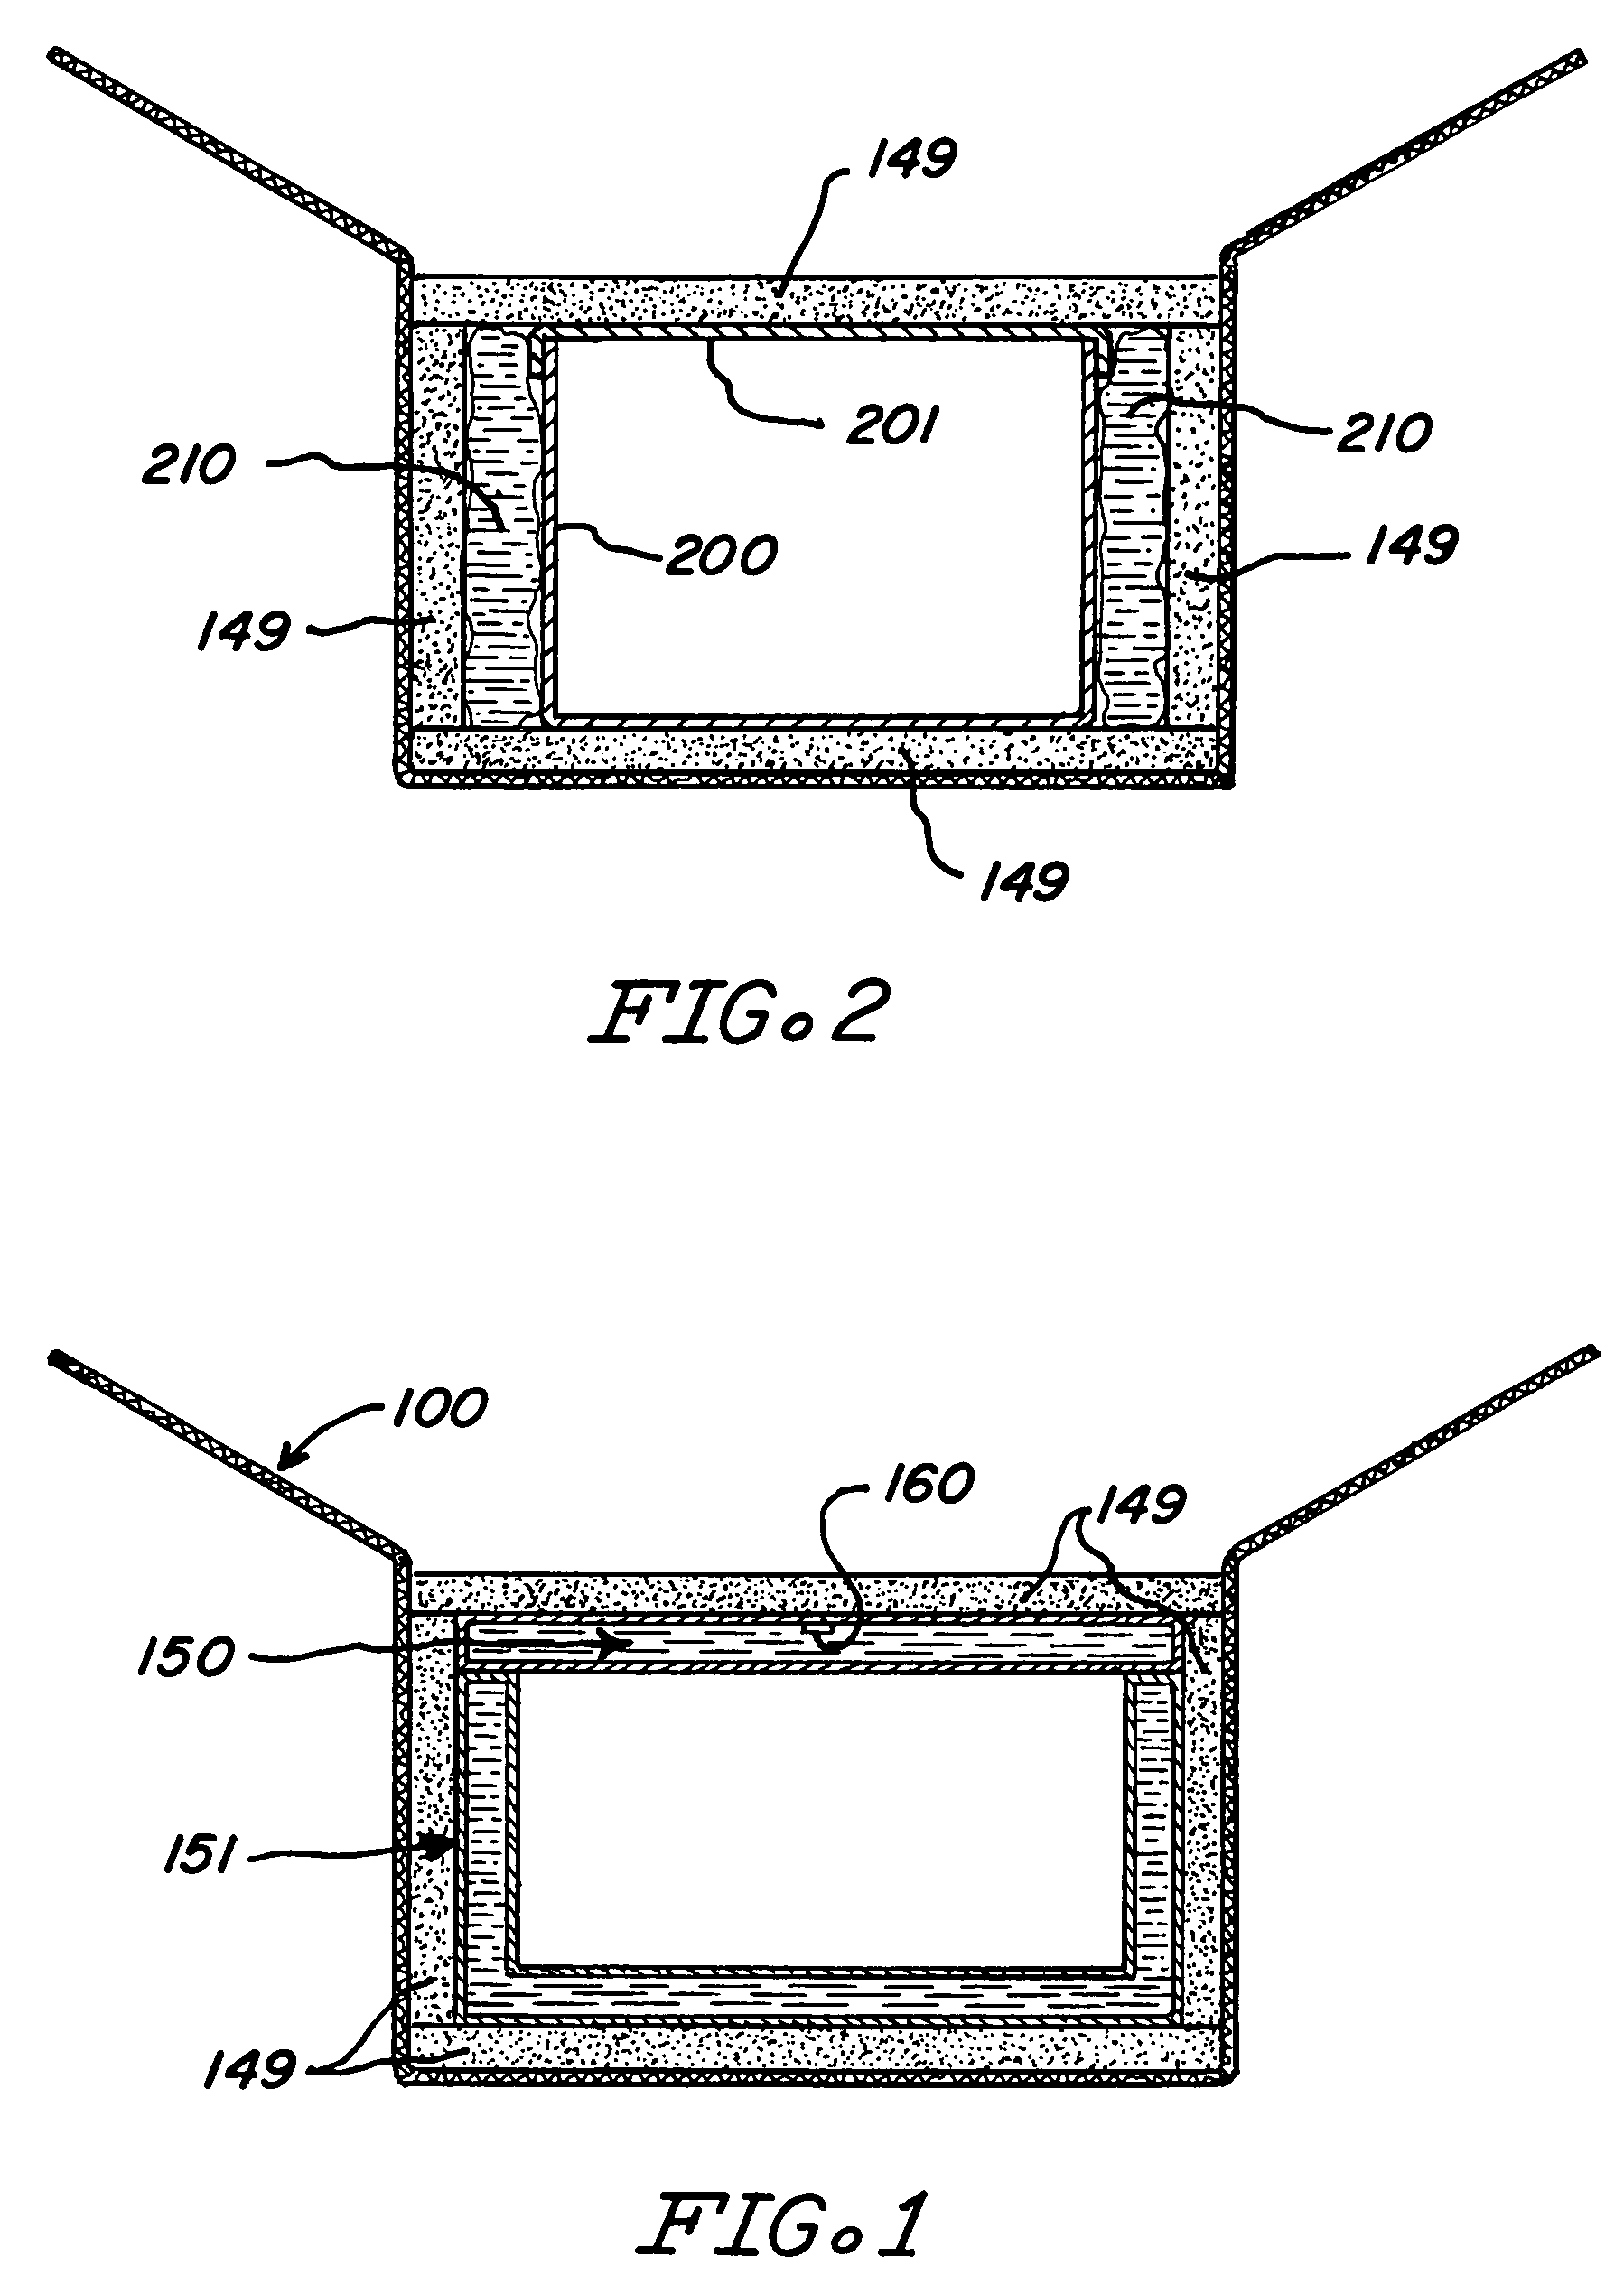 Thermal insert for container having a passive controlled temperature interior